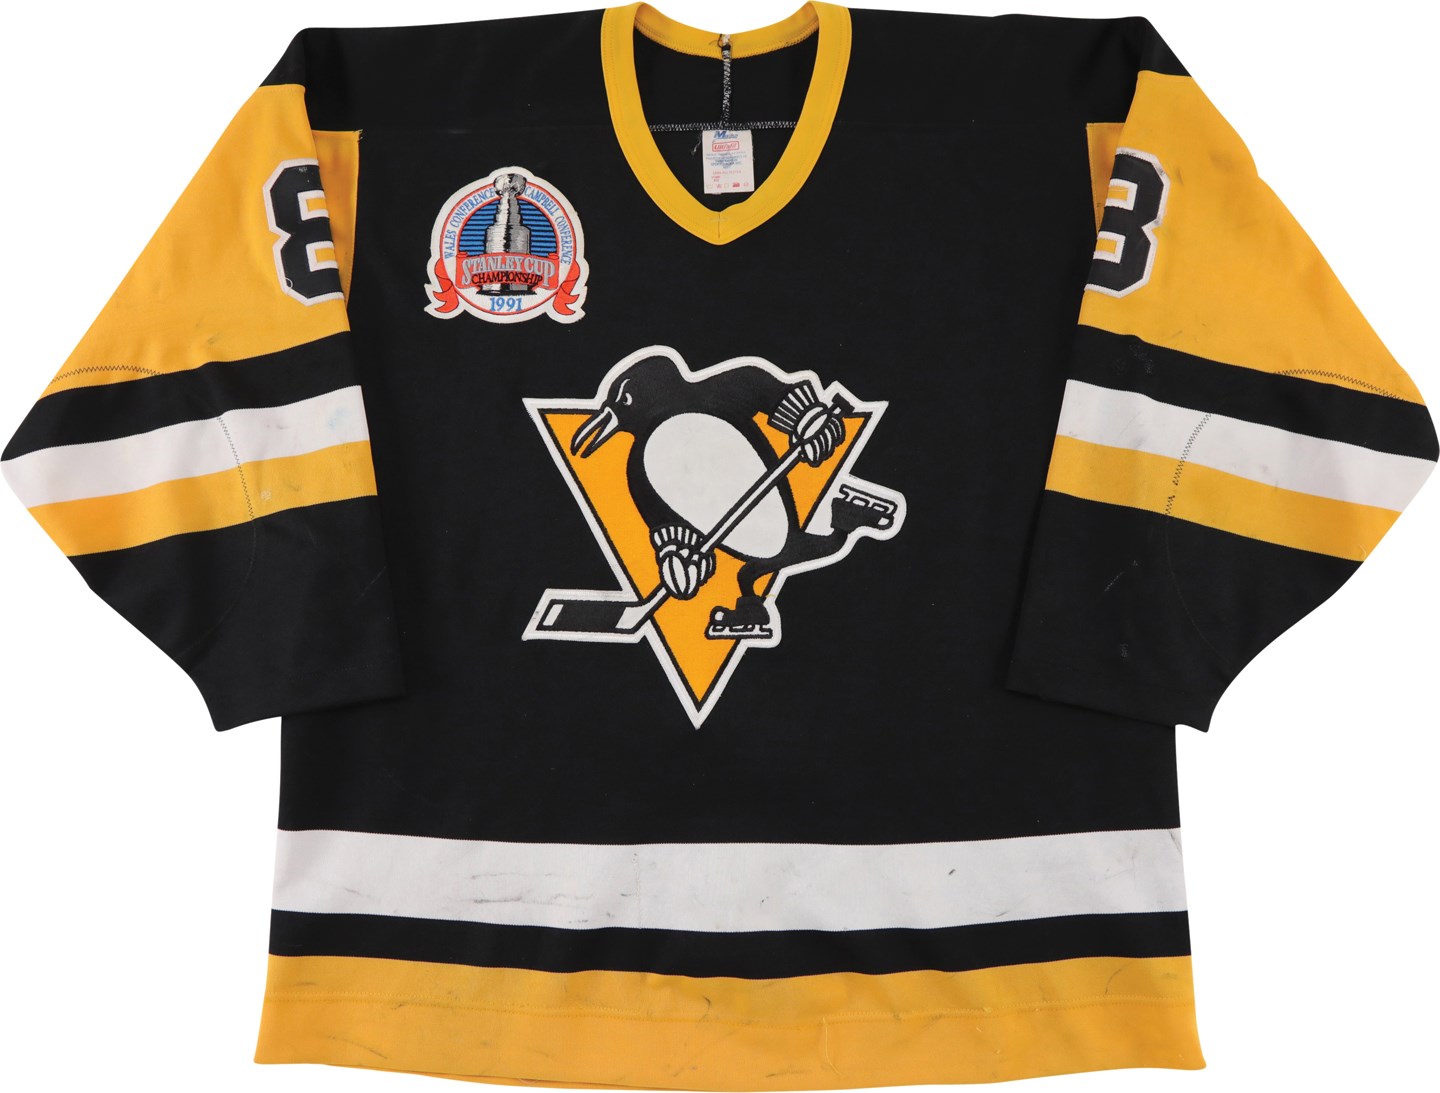 Hockey - 1991 Mark Recchi Pittsburgh Penguins Stanley Cup Finals Game Worn Jersey (Davious Sports Photo-Matched to Multiple Finals & Playoff Images)